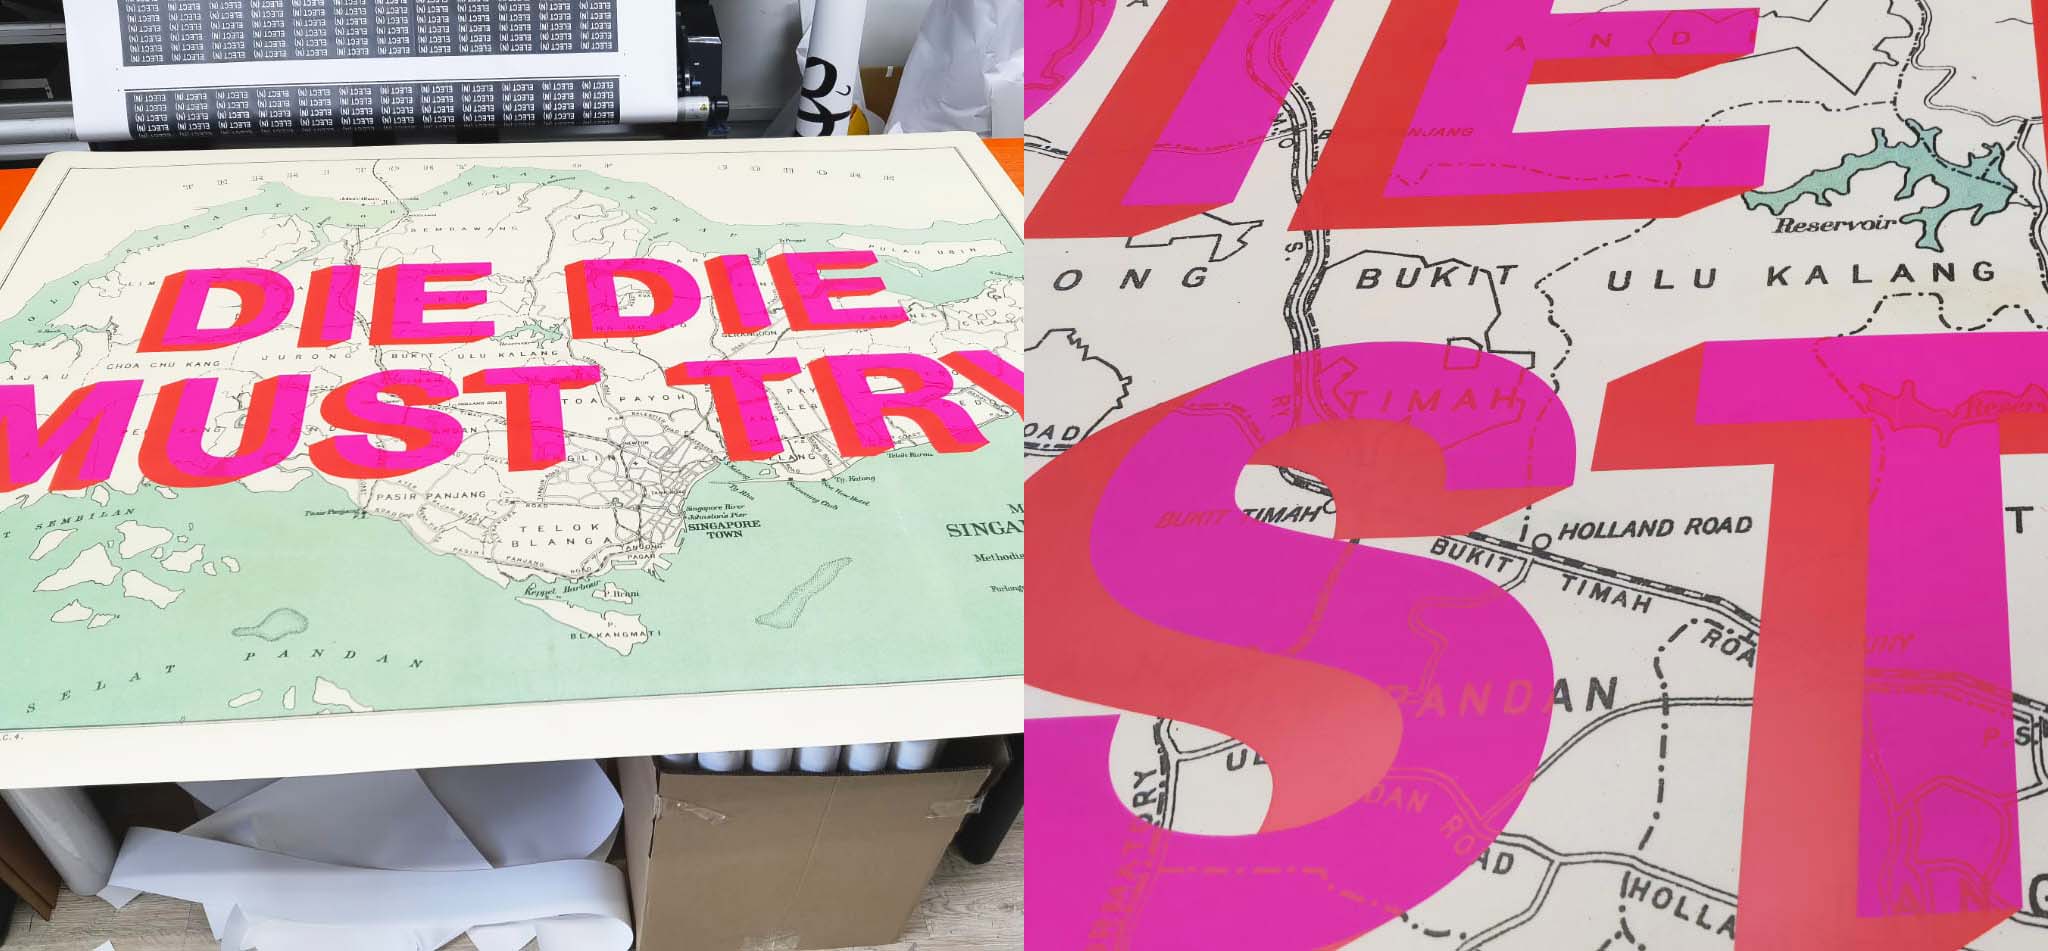 Large vintage pink text in a screen printing style on top of an old map